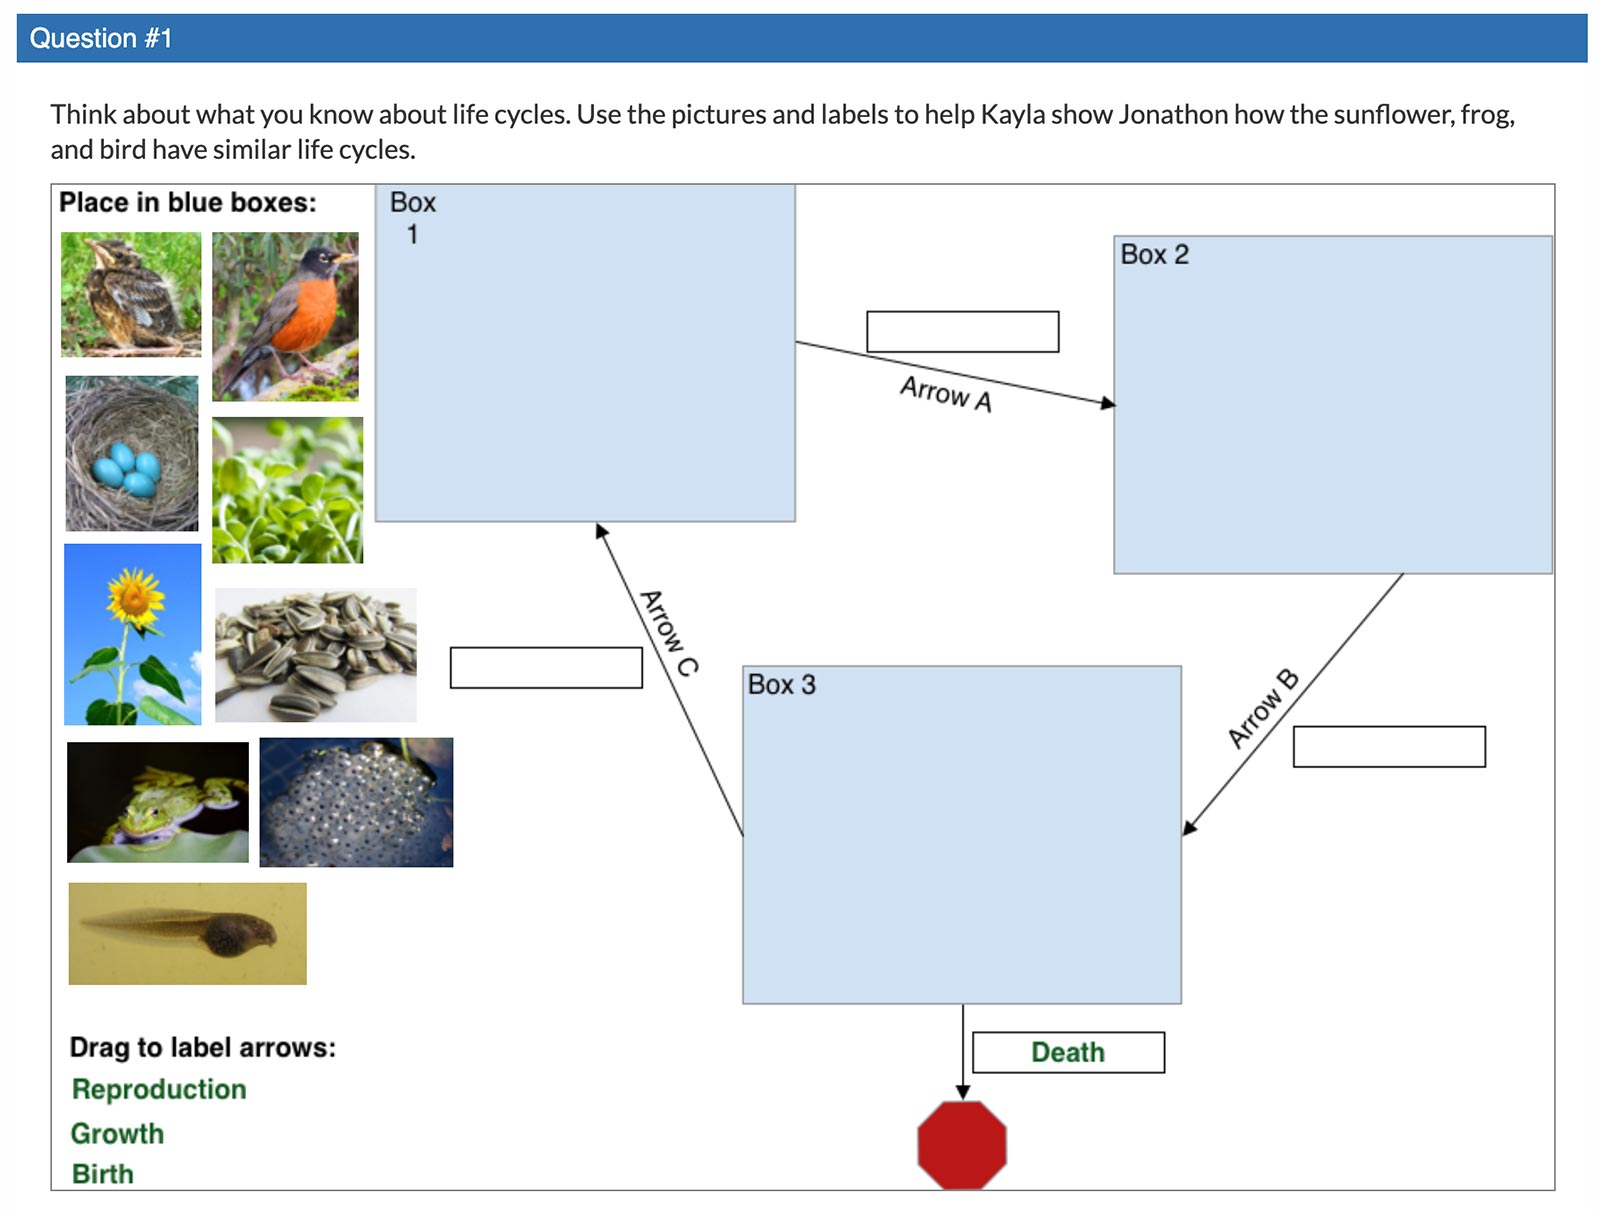 Sunflowers, Frogs, and Birds: Create a Model